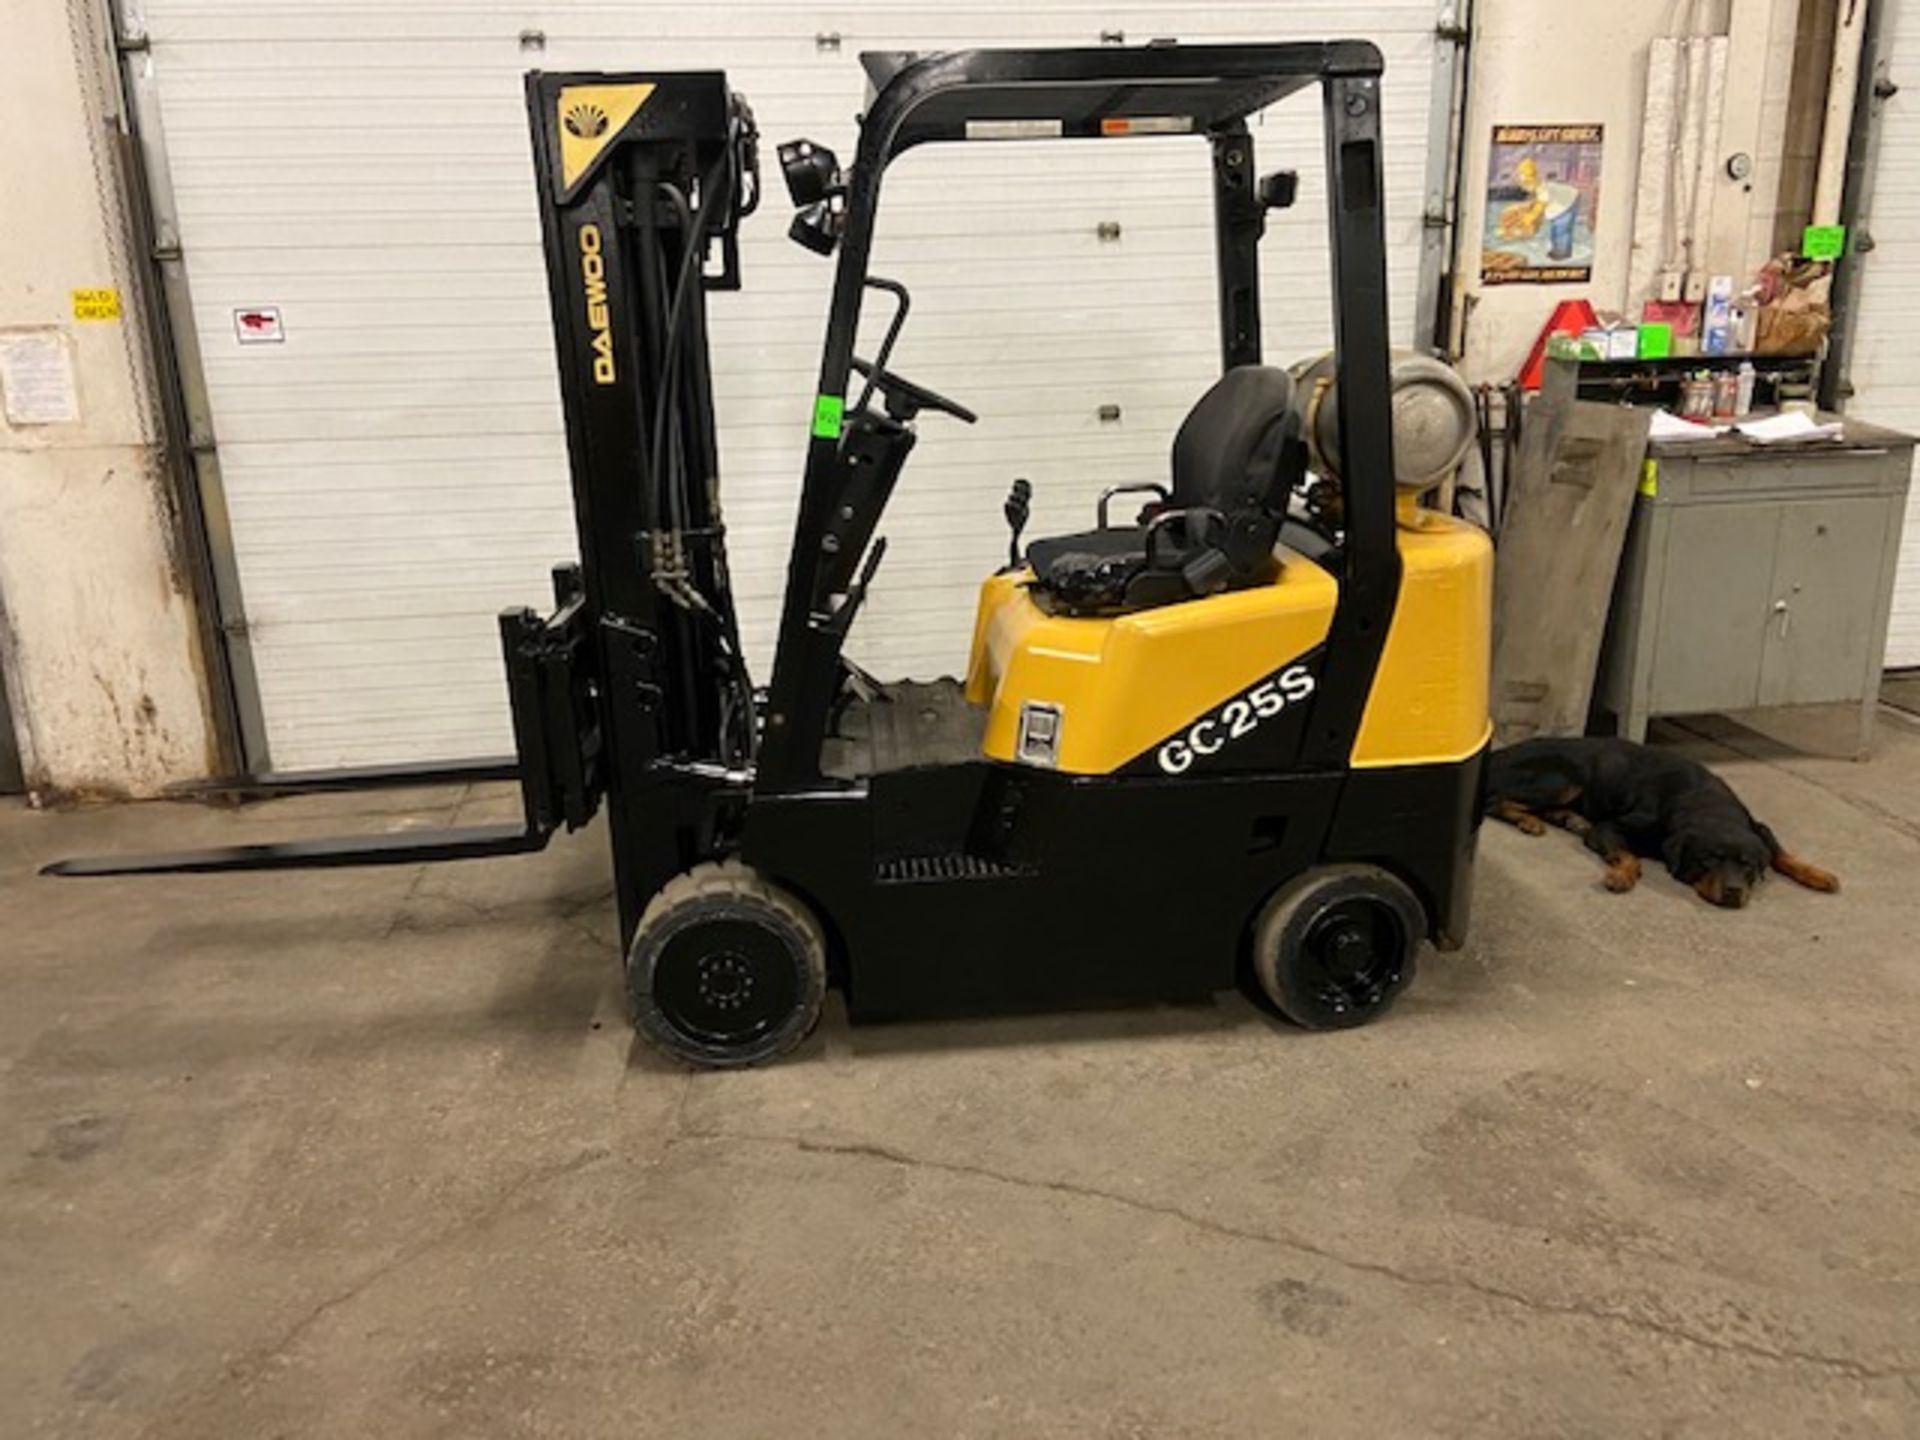 FREE CUSTOMS - Daewoo 5000lbs Capacity Forklift LPG (propane) with 3-stage mast with sideshift (no